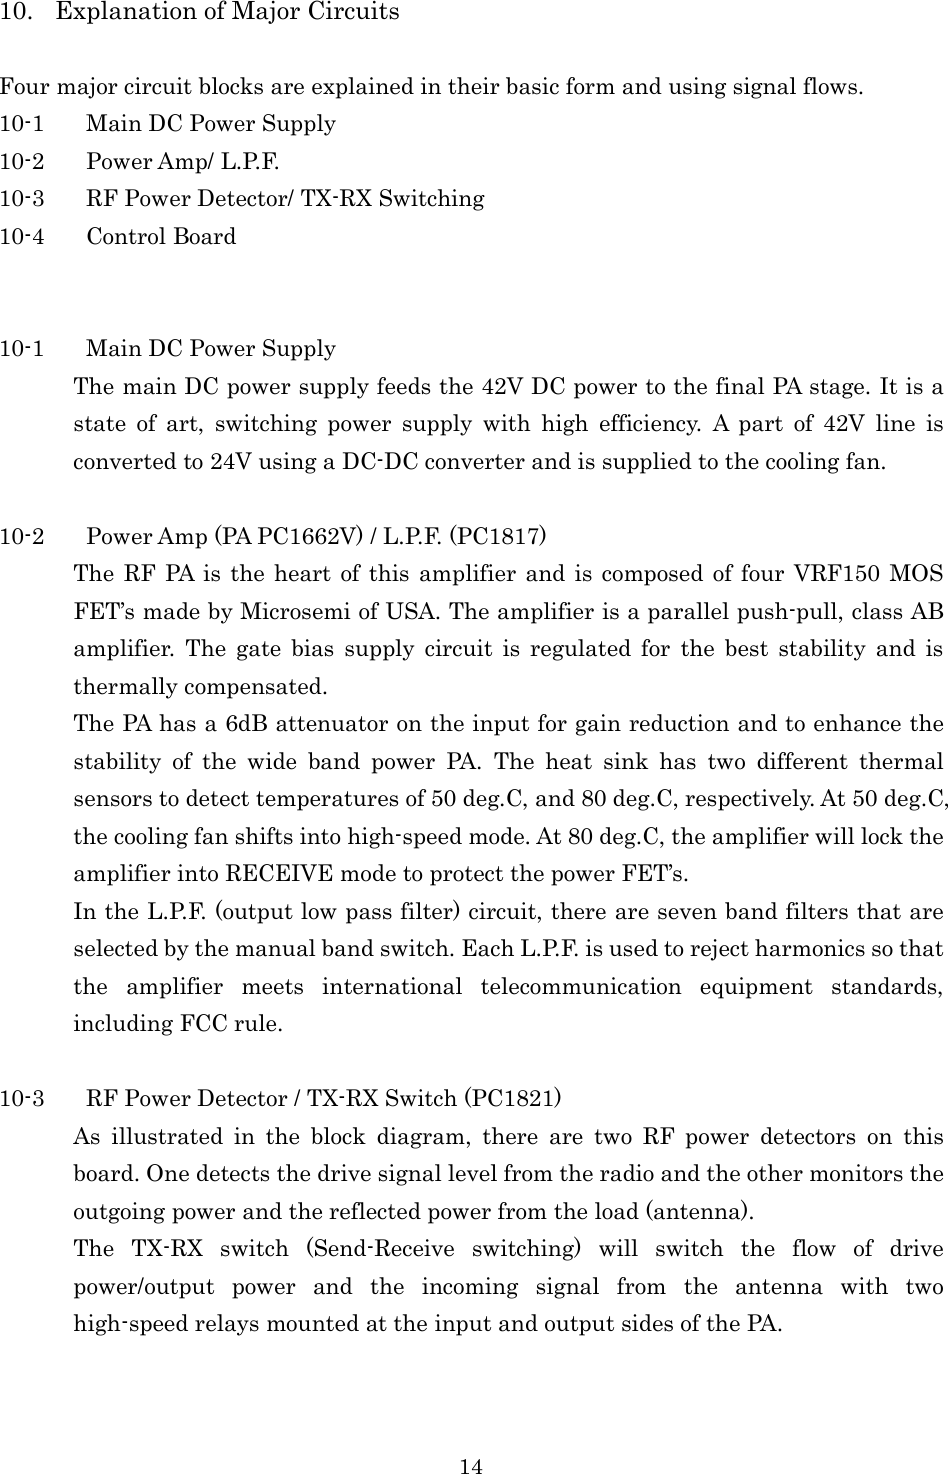 14 10. Explanation of Major Circuits  Four major circuit blocks are explained in their basic form and using signal flows. 10-1 Main DC Power Supply 10-2 Power Amp/ L.P.F. 10-3 RF Power Detector/ TX-RX Switching 10-4 Control Board   10-1 Main DC Power Supply The main DC power supply feeds the 42V DC power to the final PA stage. It is a state  of  art,  switching  power  supply  with  high  efficiency.  A  part  of  42V  line  is converted to 24V using a DC-DC converter and is supplied to the cooling fan.  10-2 Power Amp (PA PC1662V) / L.P.F. (PC1817) The RF  PA is the  heart of this  amplifier and is composed of four VRF150 MOS FET’s made by Microsemi of USA. The amplifier is a parallel push-pull, class AB amplifier.  The  gate  bias  supply  circuit  is  regulated  for  the  best  stability  and  is thermally compensated. The PA has a 6dB attenuator on the input for gain reduction and to enhance the stability  of  the  wide  band  power  PA.  The  heat  sink  has  two  different  thermal sensors to detect temperatures of 50 deg.C, and 80 deg.C, respectively. At 50 deg.C, the cooling fan shifts into high-speed mode. At 80 deg.C, the amplifier will lock the amplifier into RECEIVE mode to protect the power FET’s. In the L.P.F. (output low pass filter) circuit, there are seven band filters that are selected by the manual band switch. Each L.P.F. is used to reject harmonics so that the  amplifier  meets  international  telecommunication  equipment  standards, including FCC rule.  10-3 RF Power Detector / TX-RX Switch (PC1821) As  illustrated  in  the  block  diagram,  there  are  two  RF  power  detectors  on  this board. One detects the drive signal level from the radio and the other monitors the outgoing power and the reflected power from the load (antenna). The  TX-RX  switch  (Send-Receive  switching)  will  switch  the  flow  of  drive power/output  power  and  the  incoming  signal  from  the  antenna  with  two high-speed relays mounted at the input and output sides of the PA. 